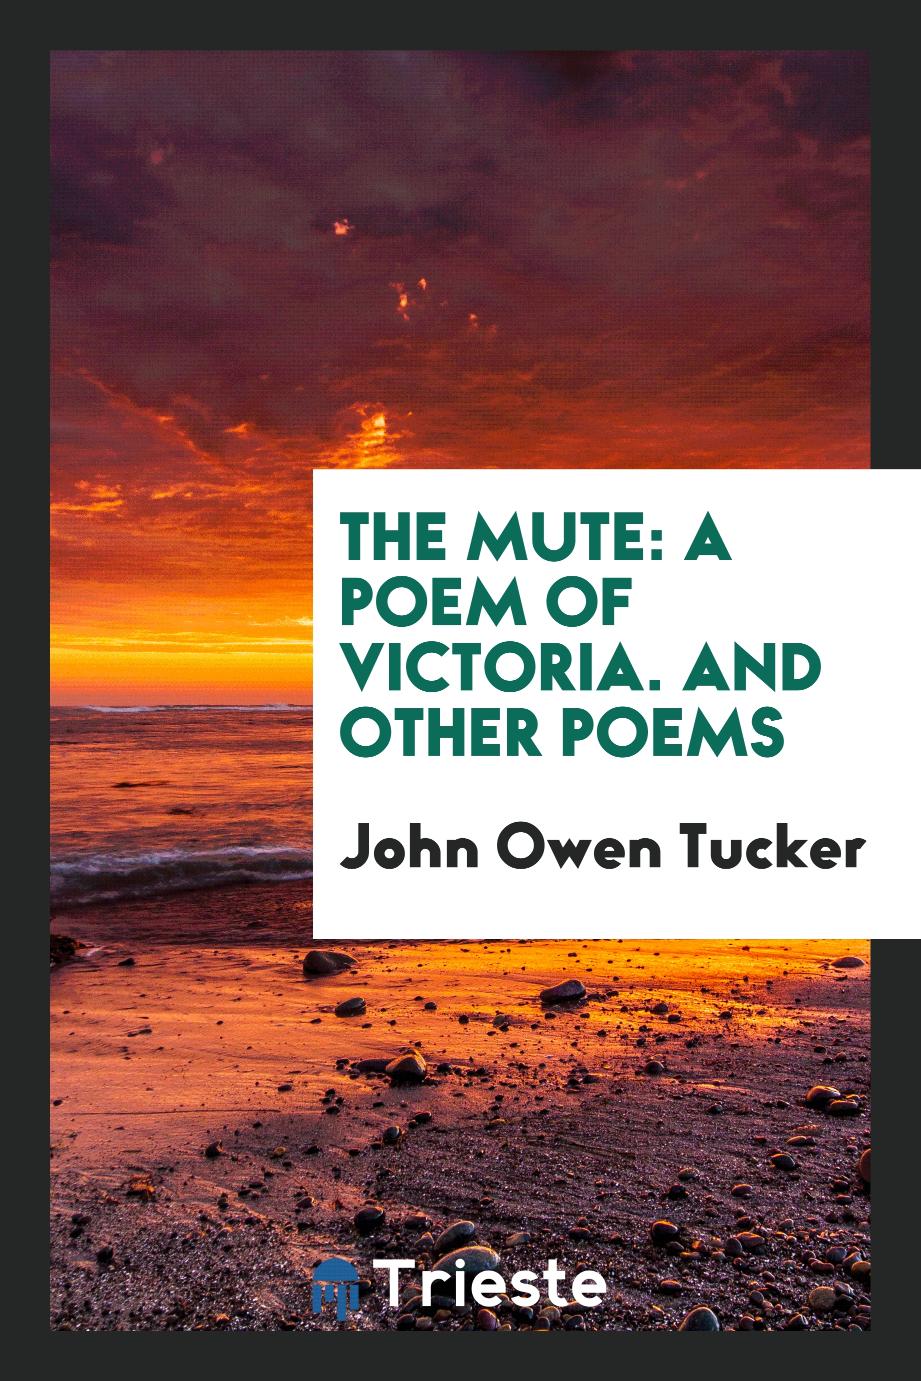 The Mute: A Poem of Victoria. And Other Poems